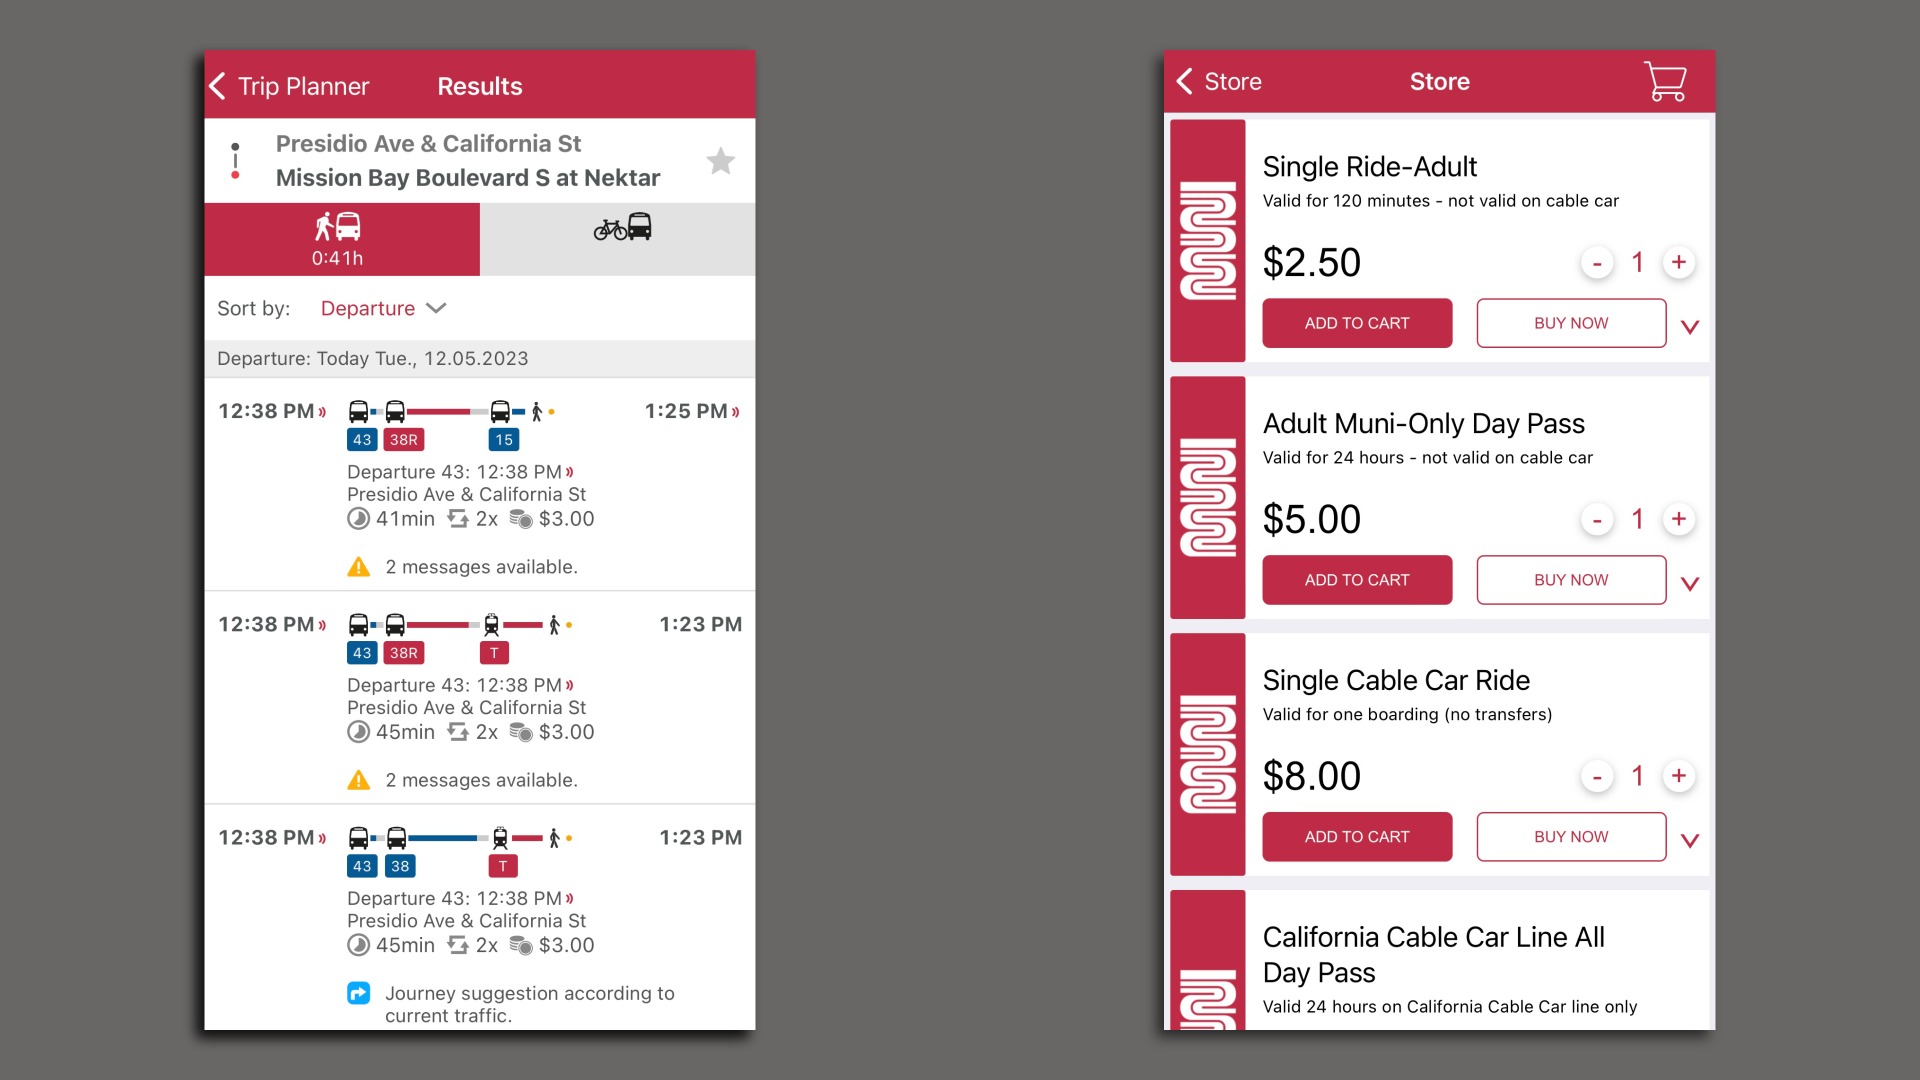 Screenshots of the MuniMobile 2 app showing route planning and ticket purchase options